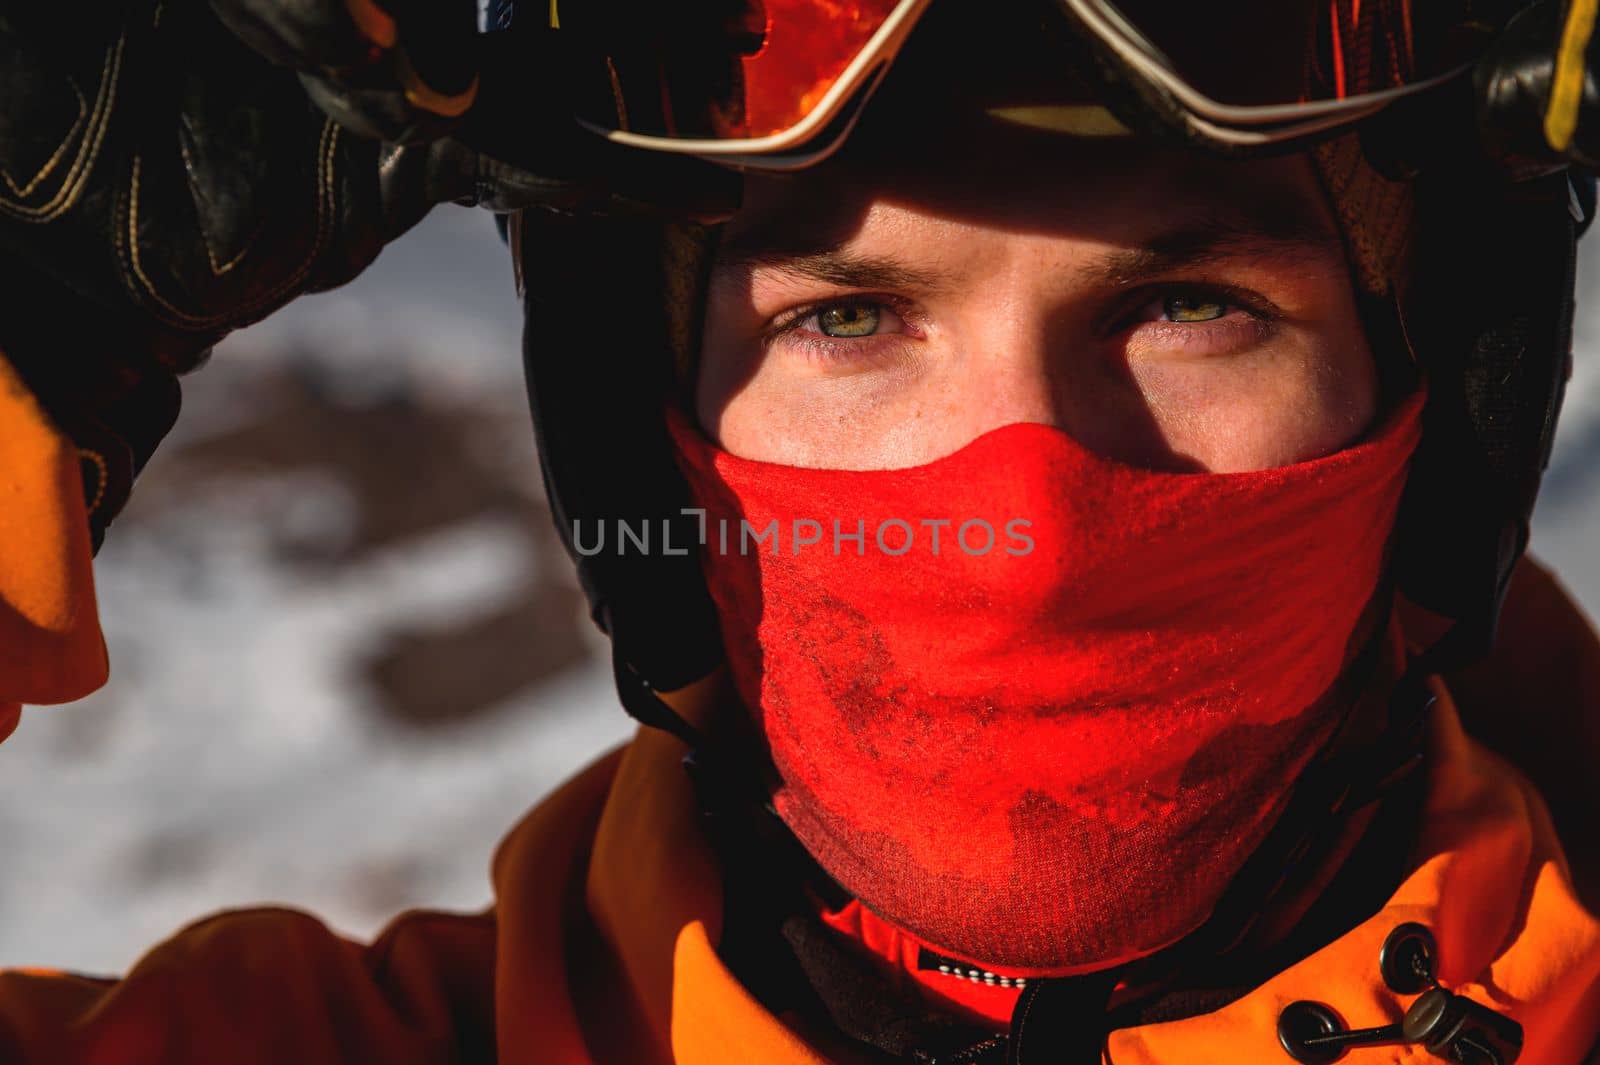 young man looks directly into the camera, close-up of the eyes. Hands holding ski mask or goggles, expressive look by yanik88